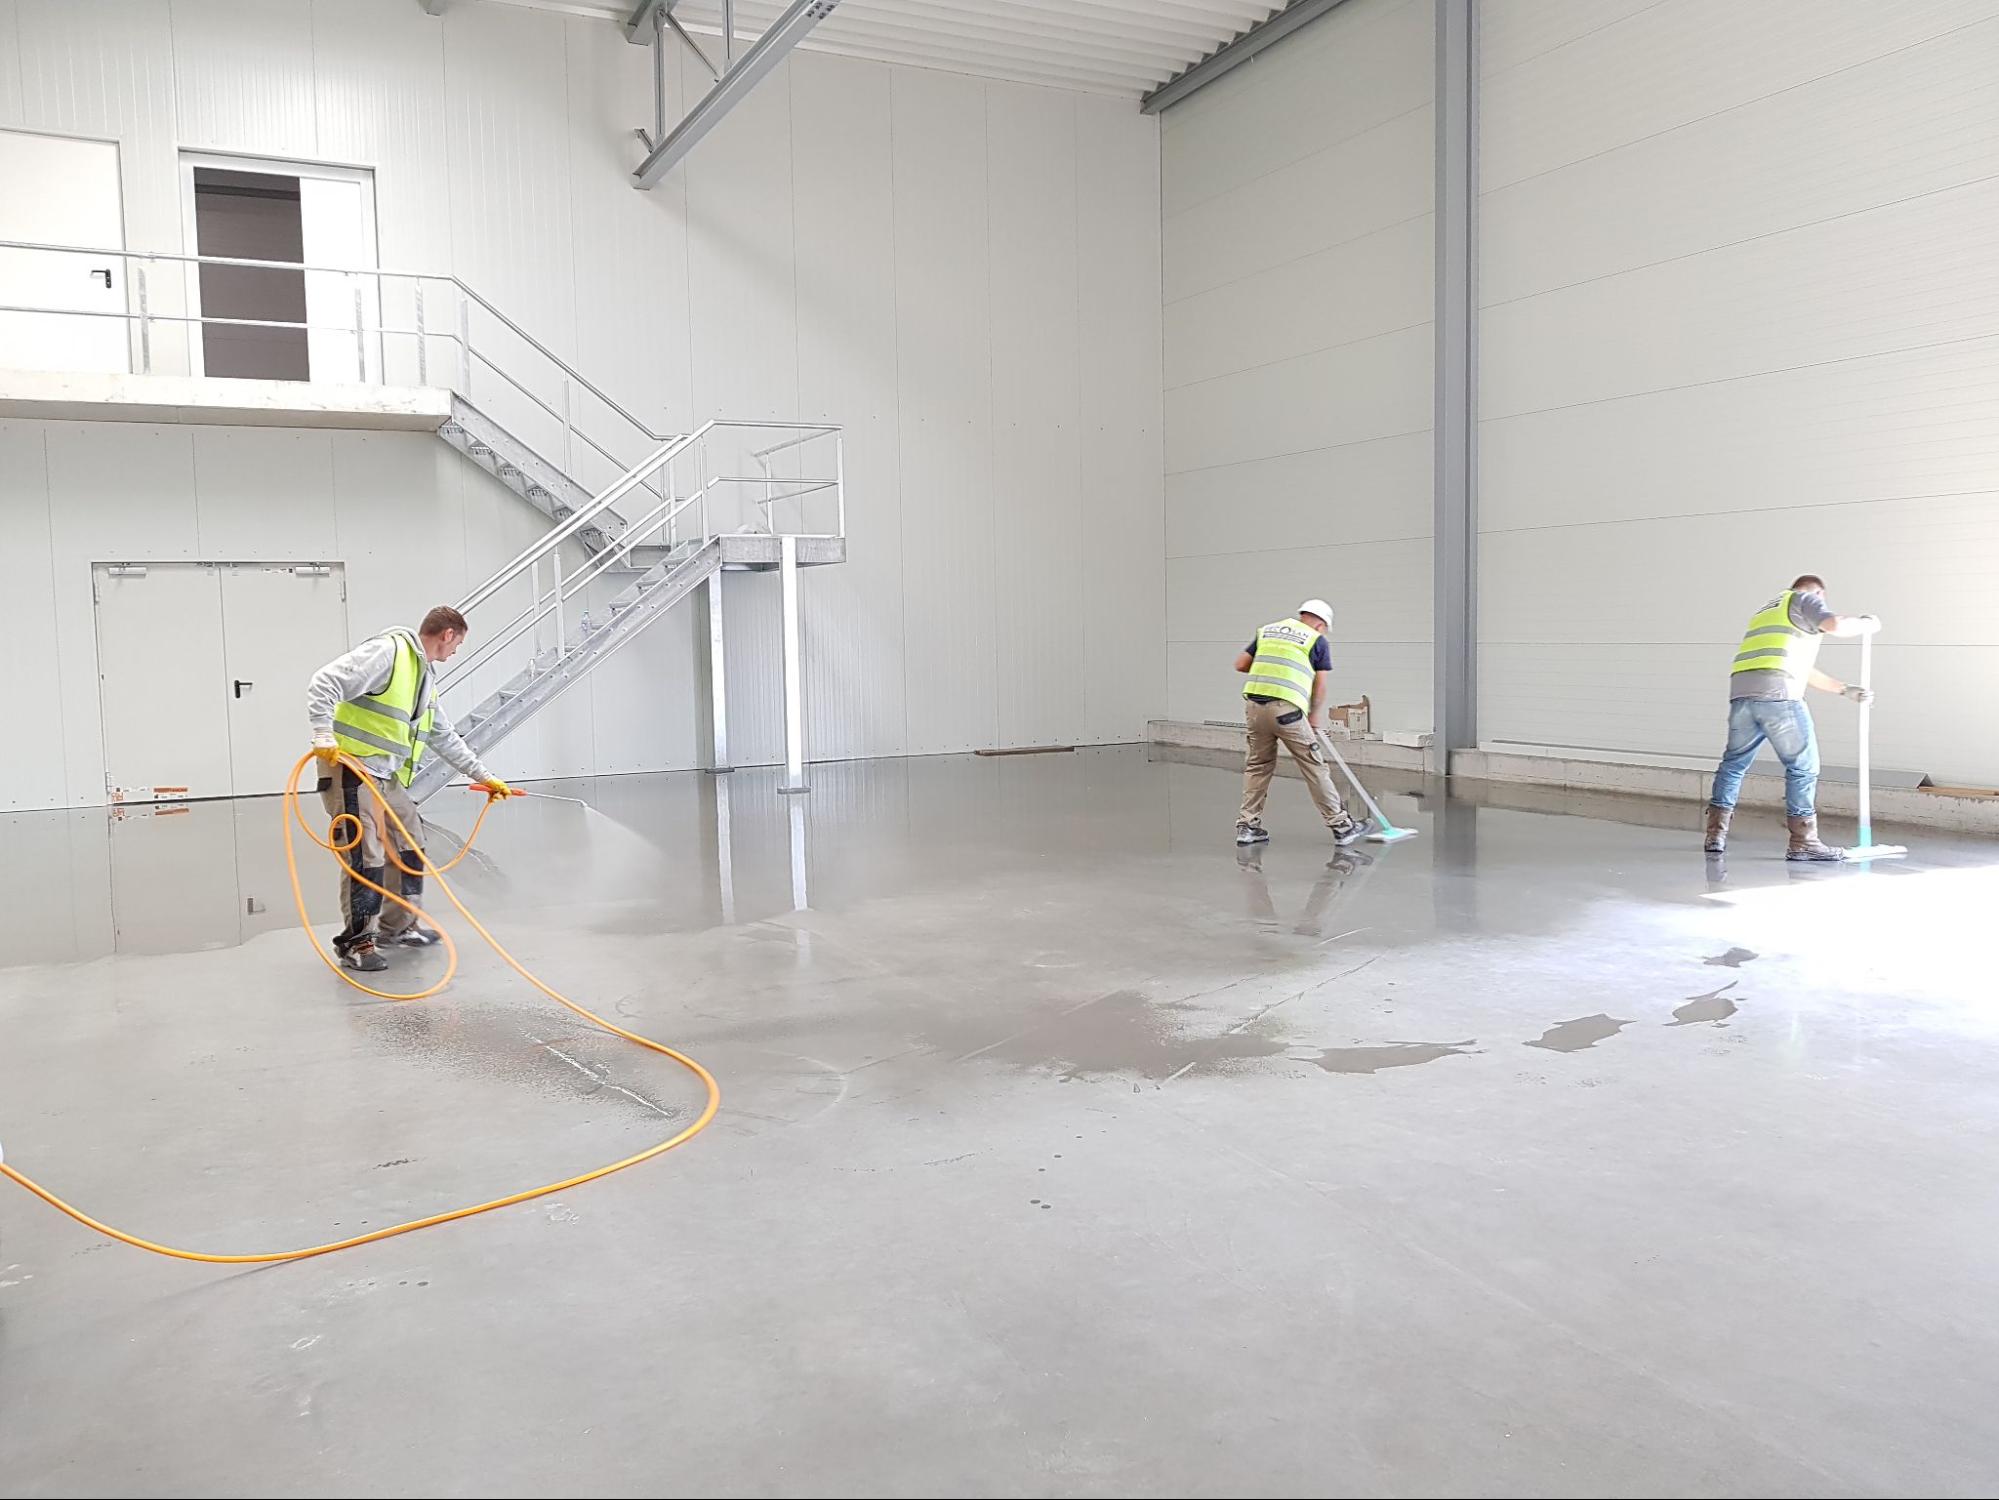 An image of three men cleaning an empty room in a large facility